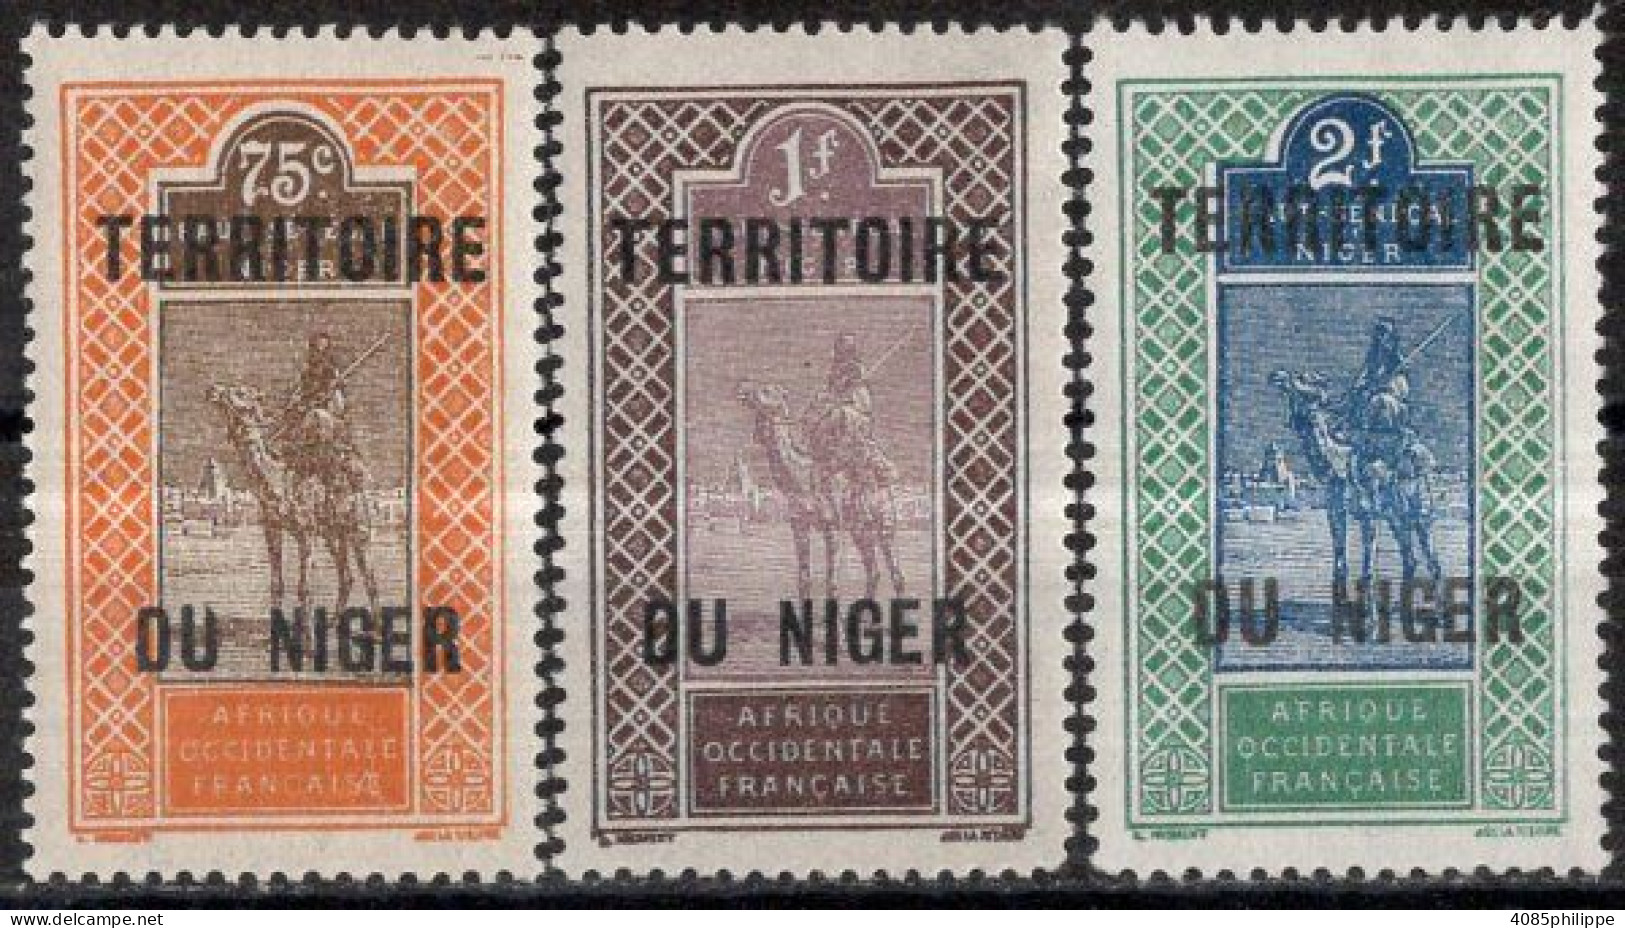 NIGER Timbres-poste N°14* à 16* Neufs Charnières Cote : 6€00 - Unused Stamps